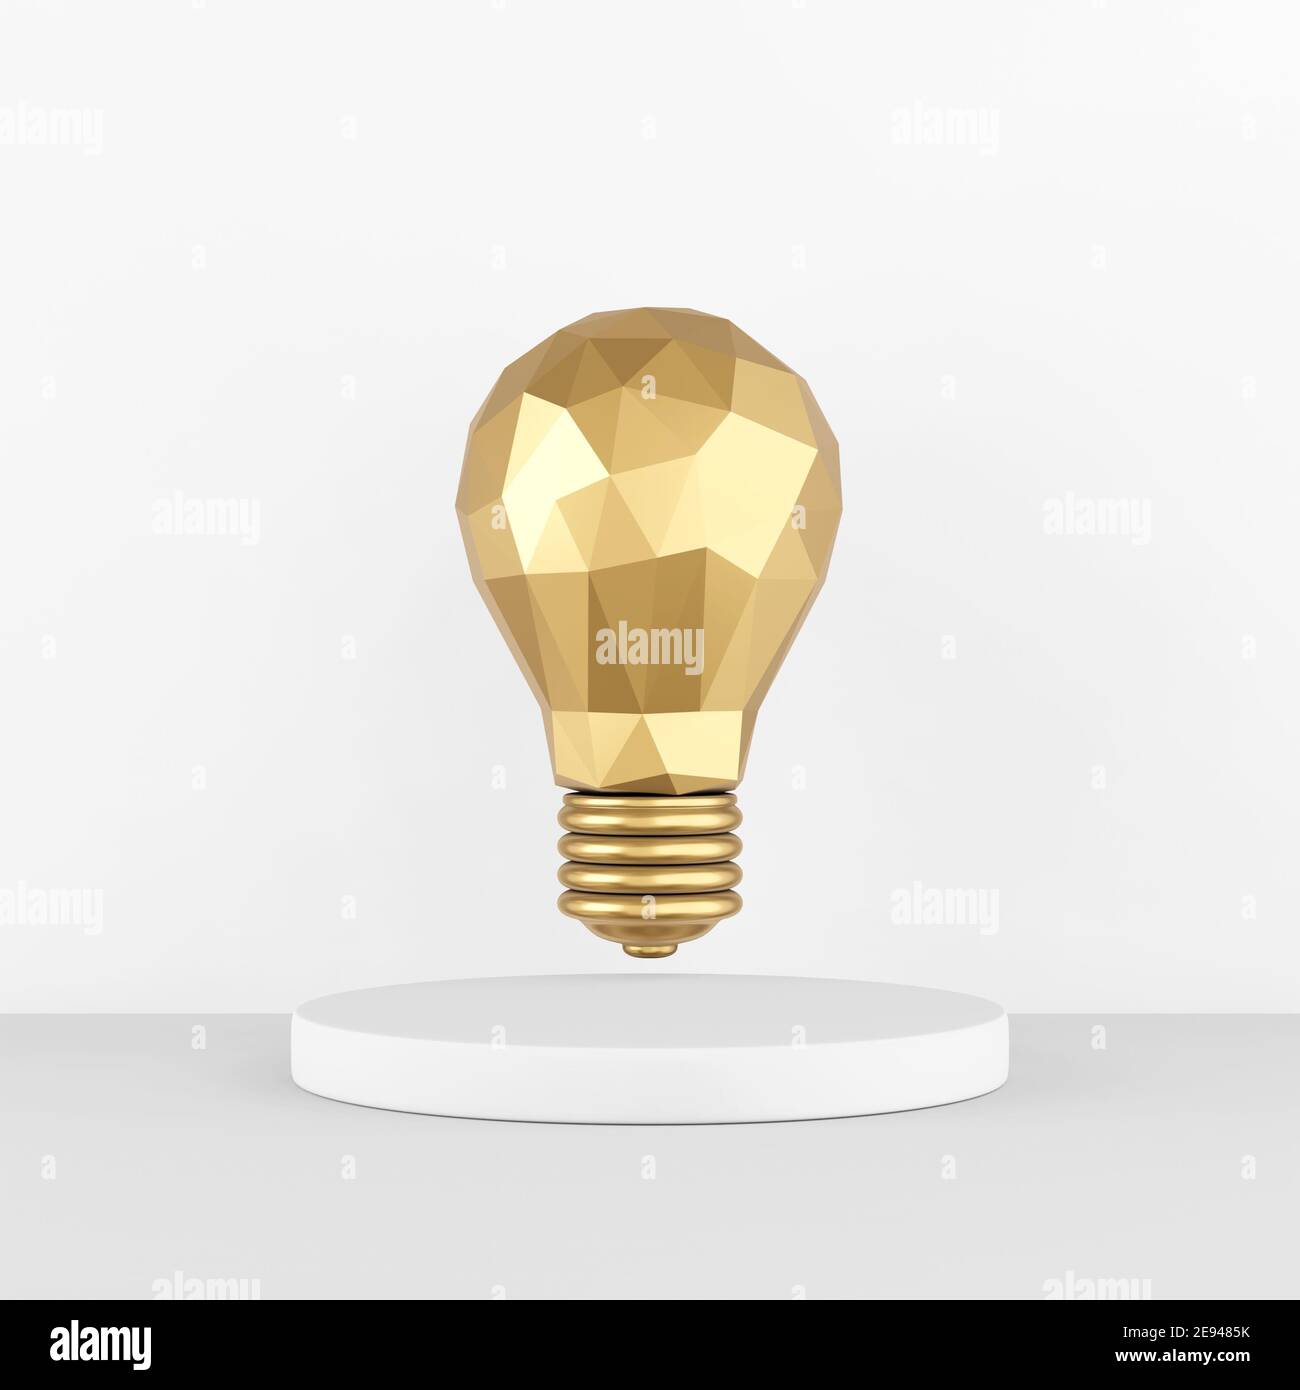 The icon is a low-poly gold light bulb on a white pedestal. 3D rendering  Stock Photo - Alamy